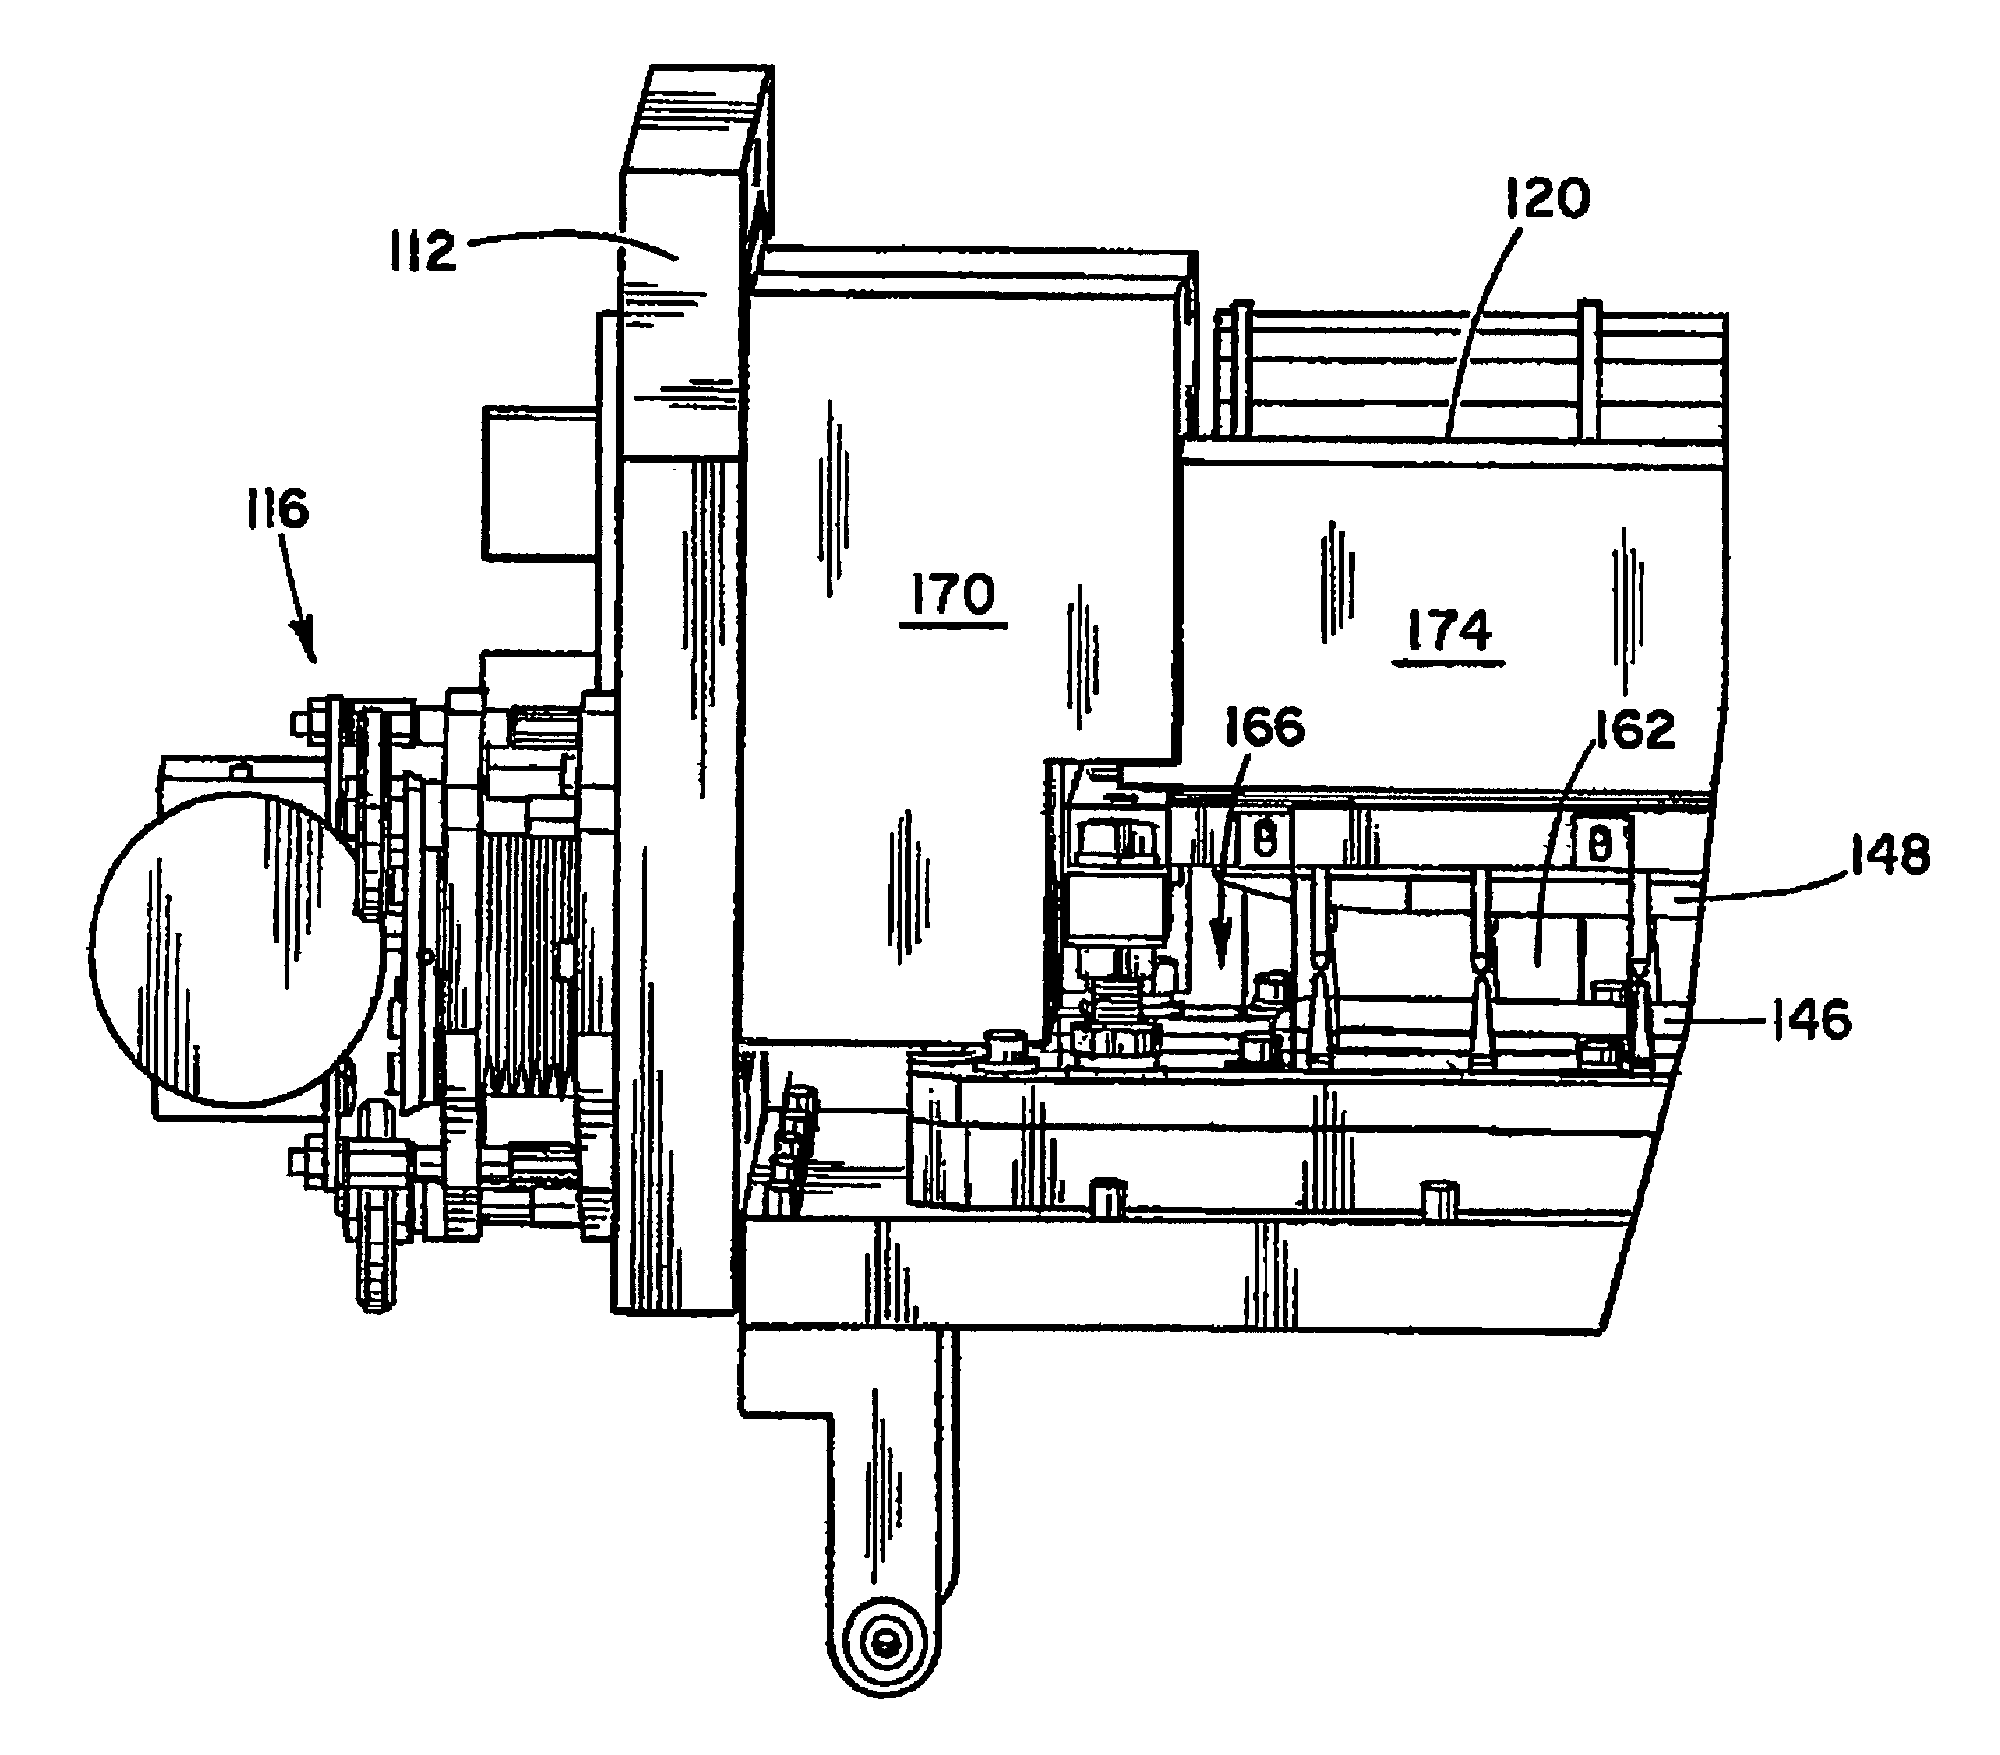 Passive gas flow management and filtration device for use in an excimer or transverse discharge laser